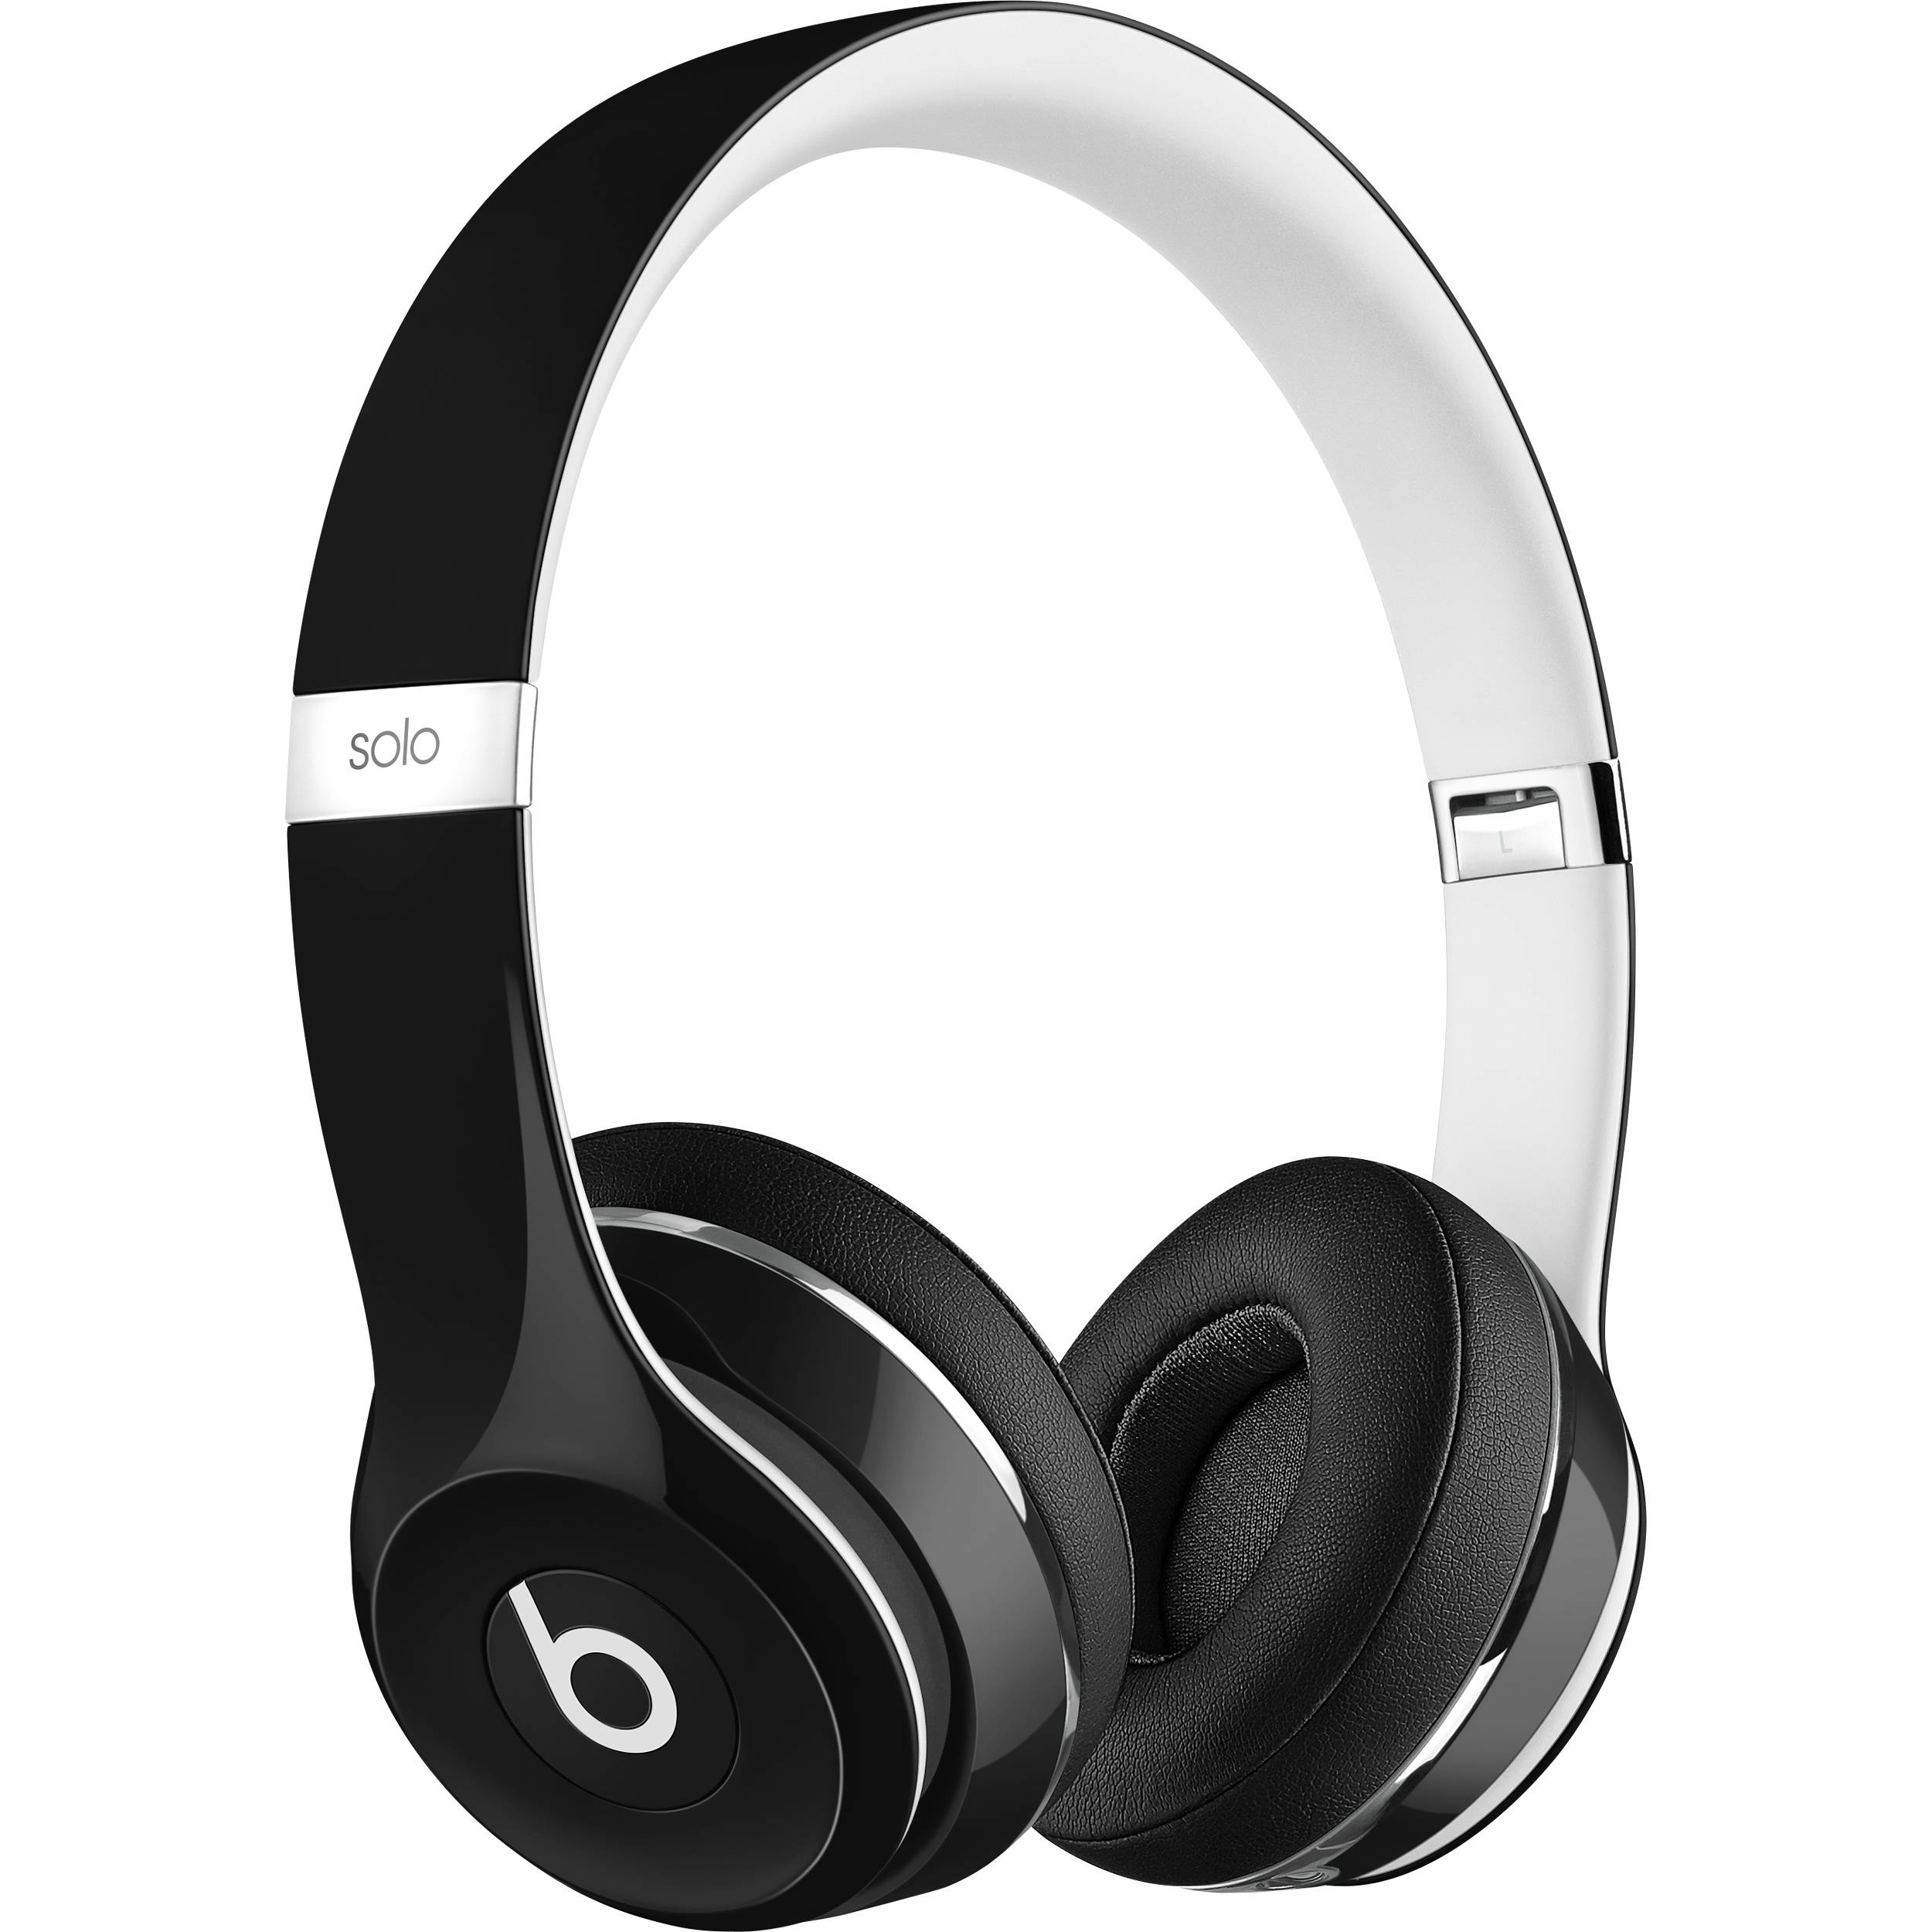 beats solo 2 wired review